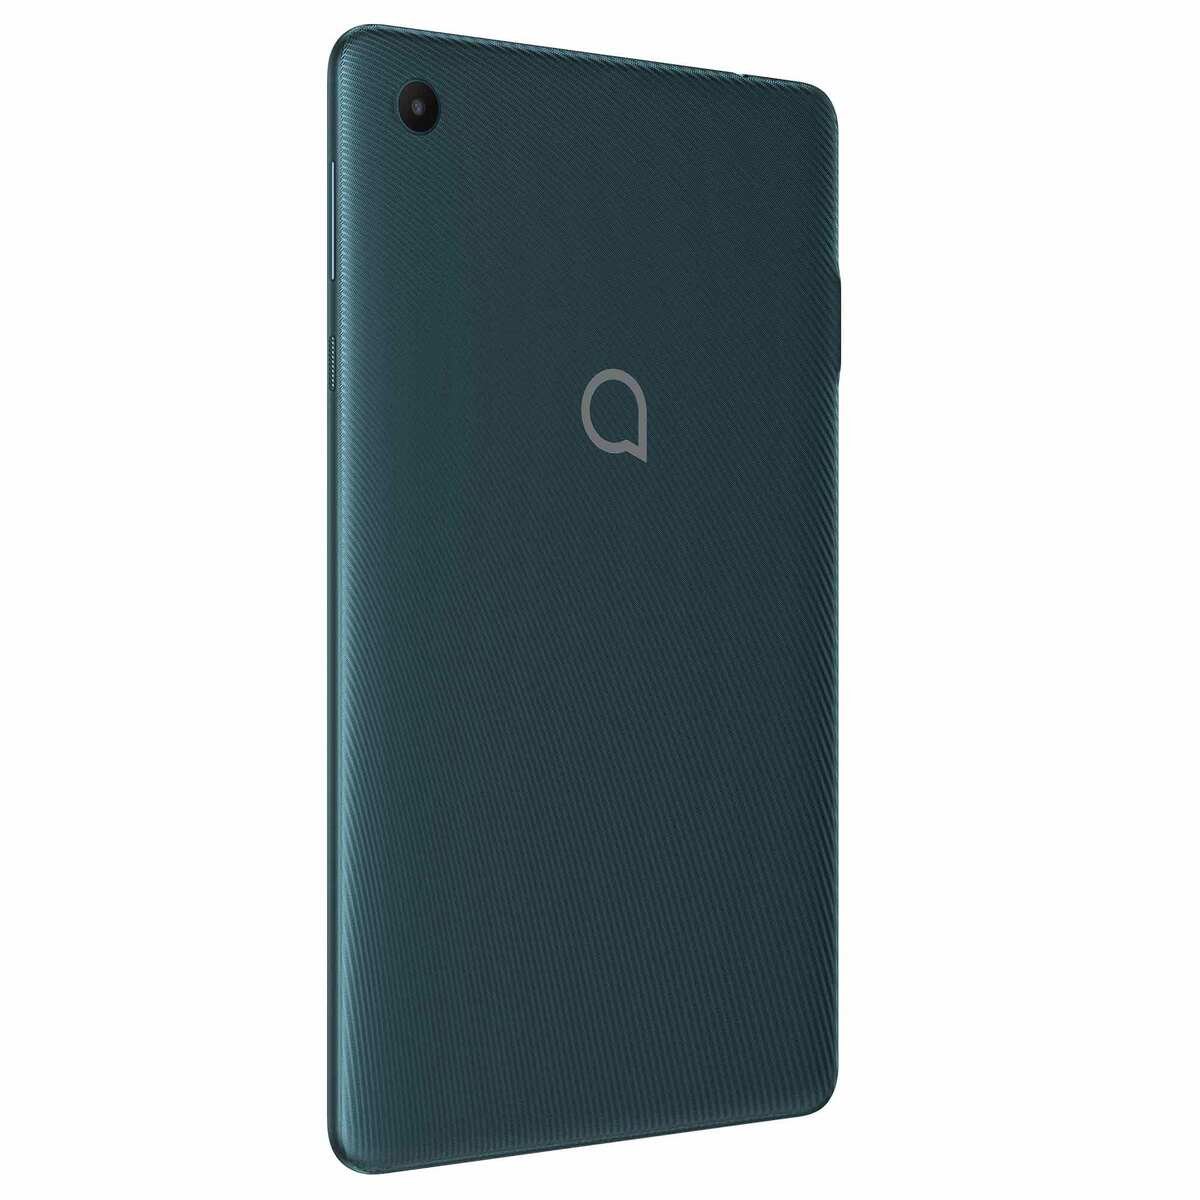 Alcatel Tablet 3T 8 9032X, 4G, Quad-core, 2GB RAM, 32GB Memory, 8 inches Display, Android, Green